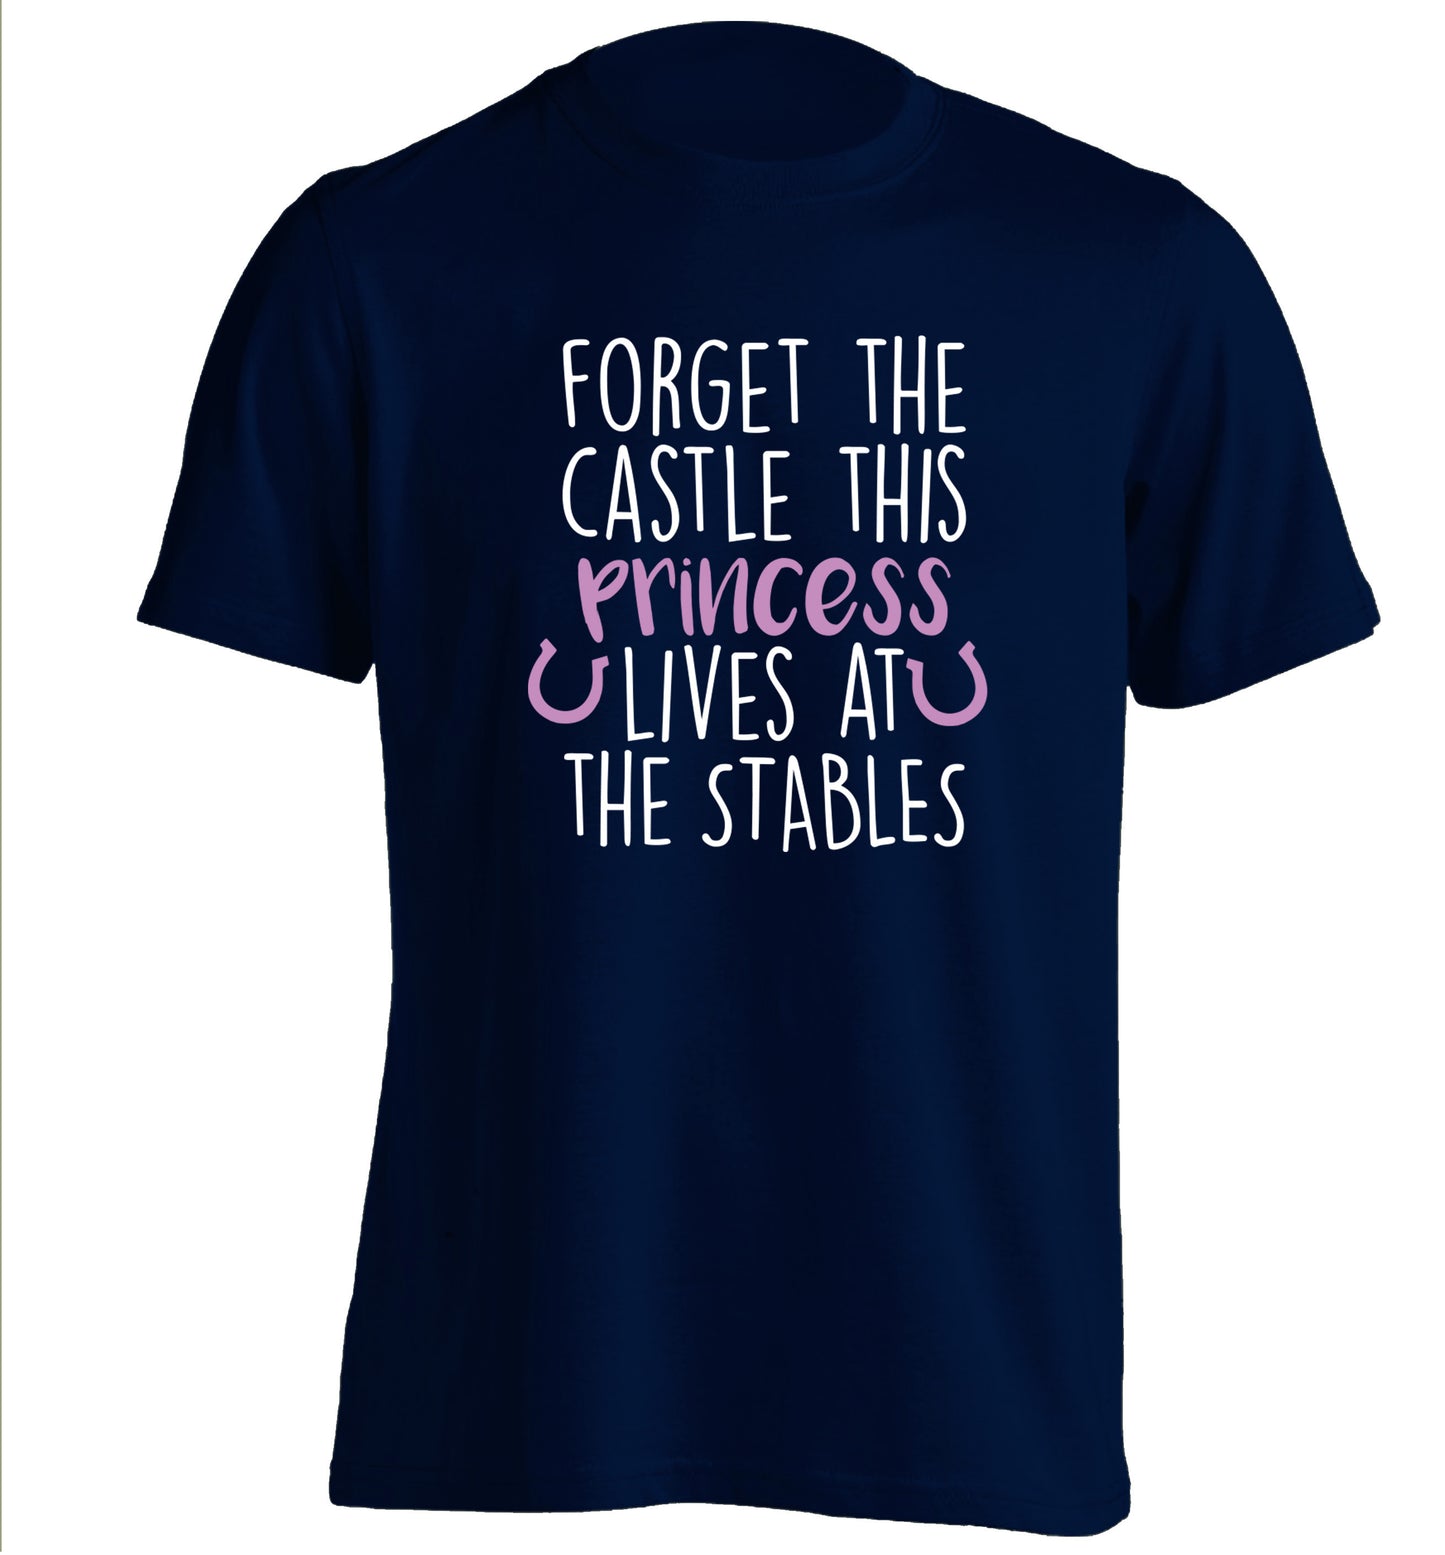 Forget the castle this princess lives at the stables adults unisex navy Tshirt 2XL